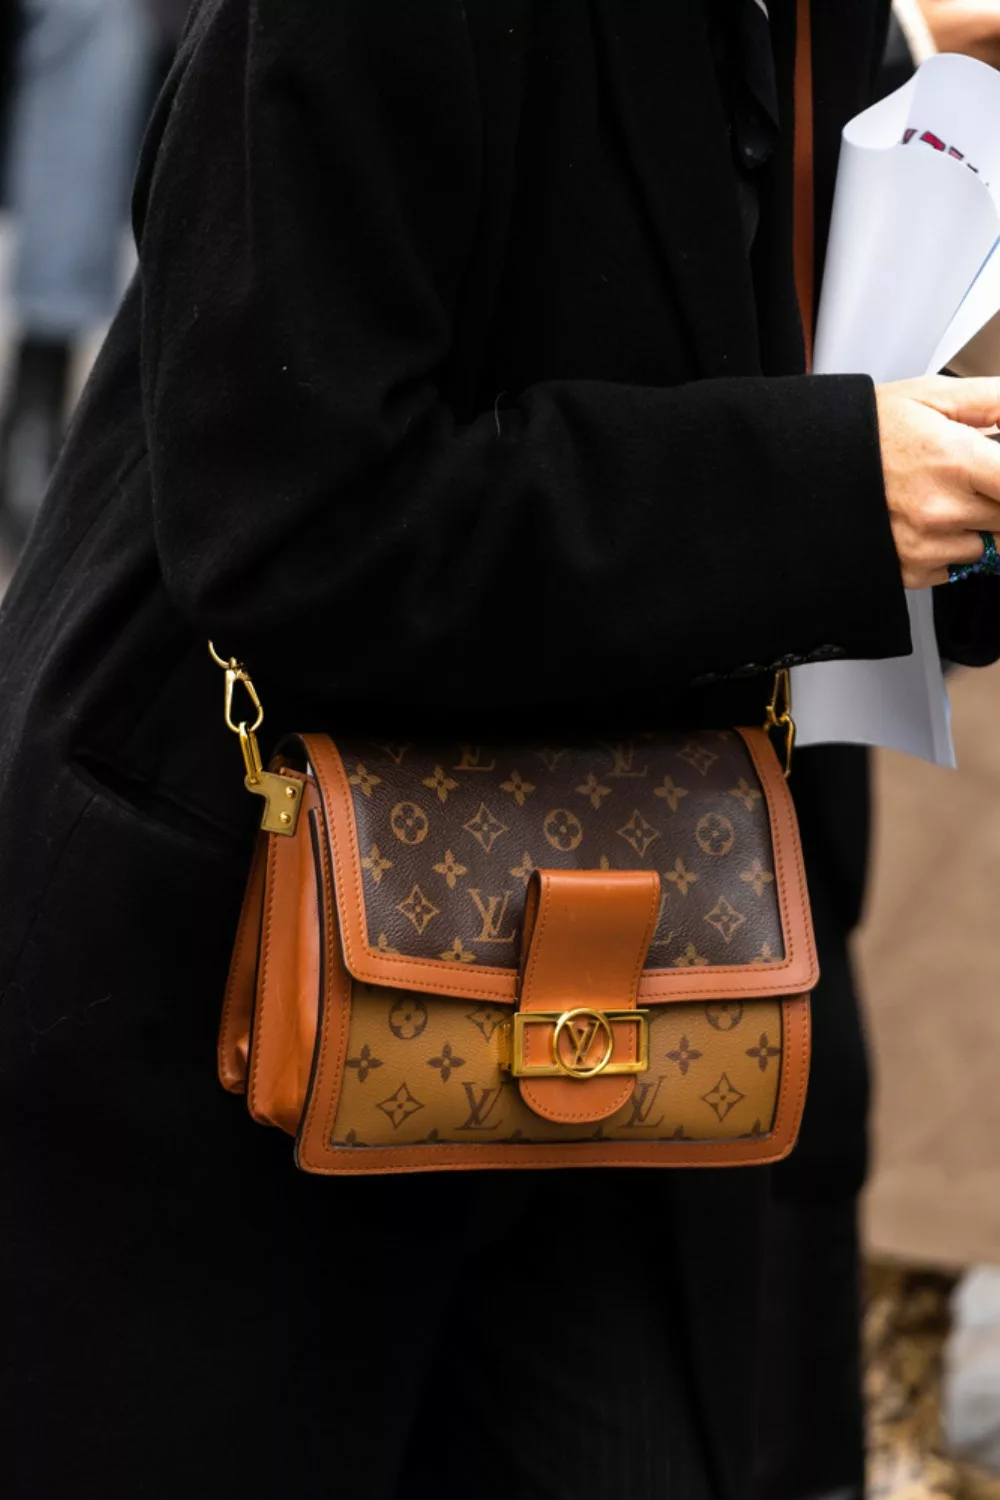 Nanoscale3DPrinted Knockoff Louis Vuitton Bag Fetches 63K at auction   Core77